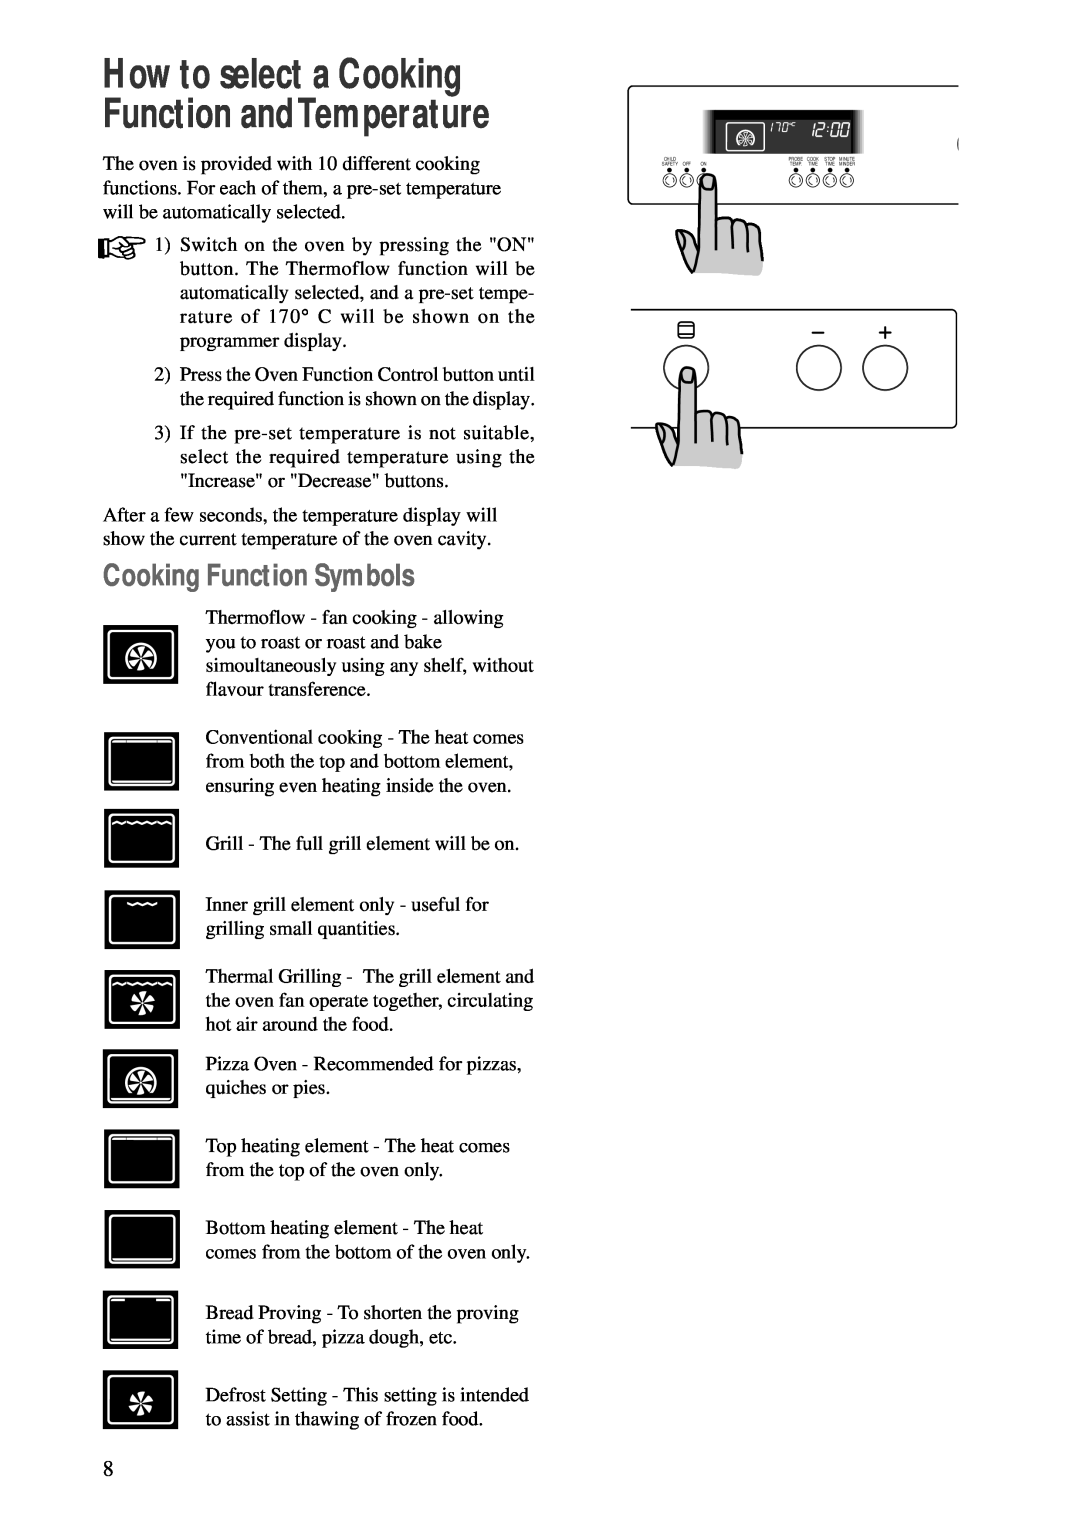 Zanussi ZBM 890 manual Cooking Function Symbols, How to select a Cooking Function andTemperature 